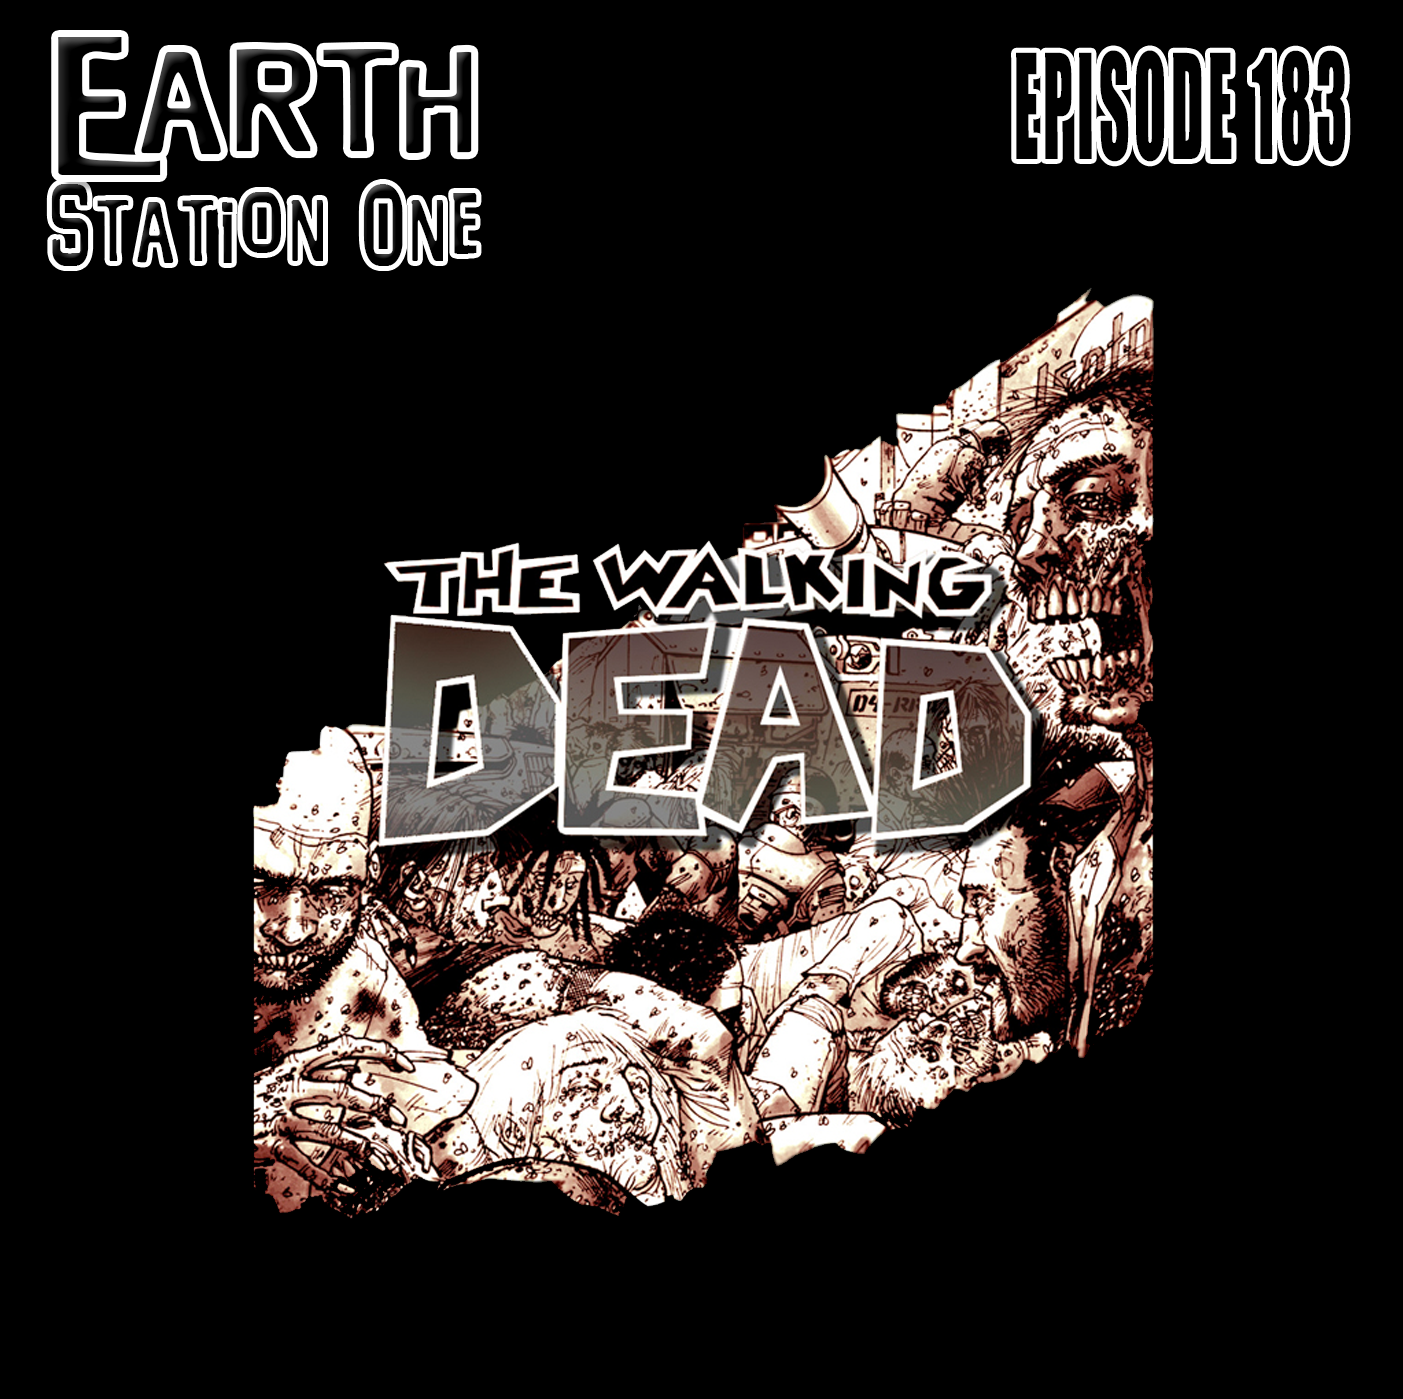 Earth Station One Episode 183